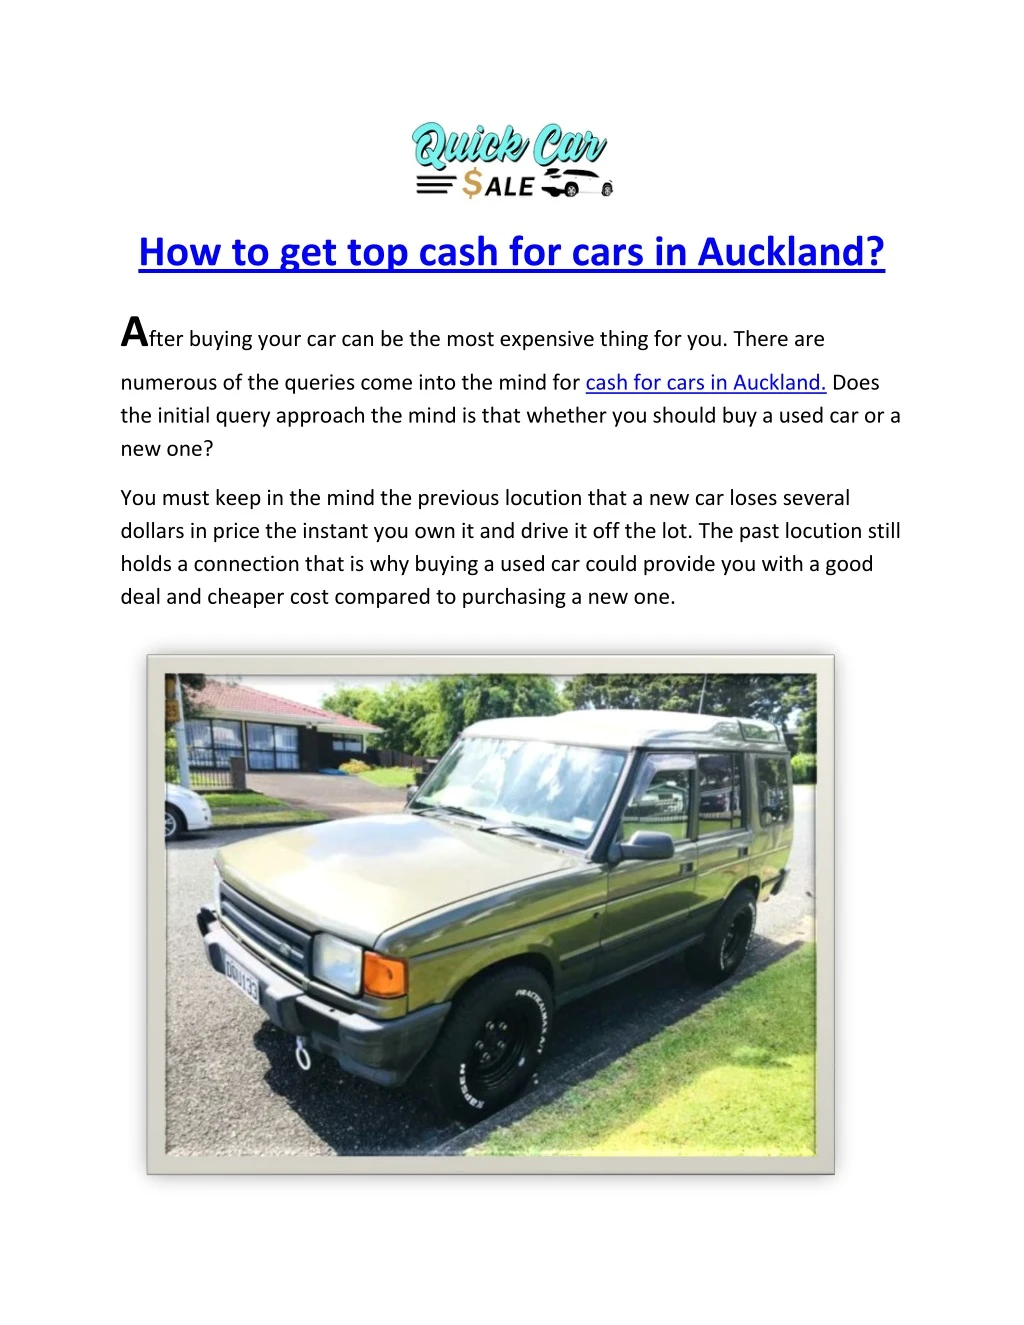 how to get top cash for cars in auckland